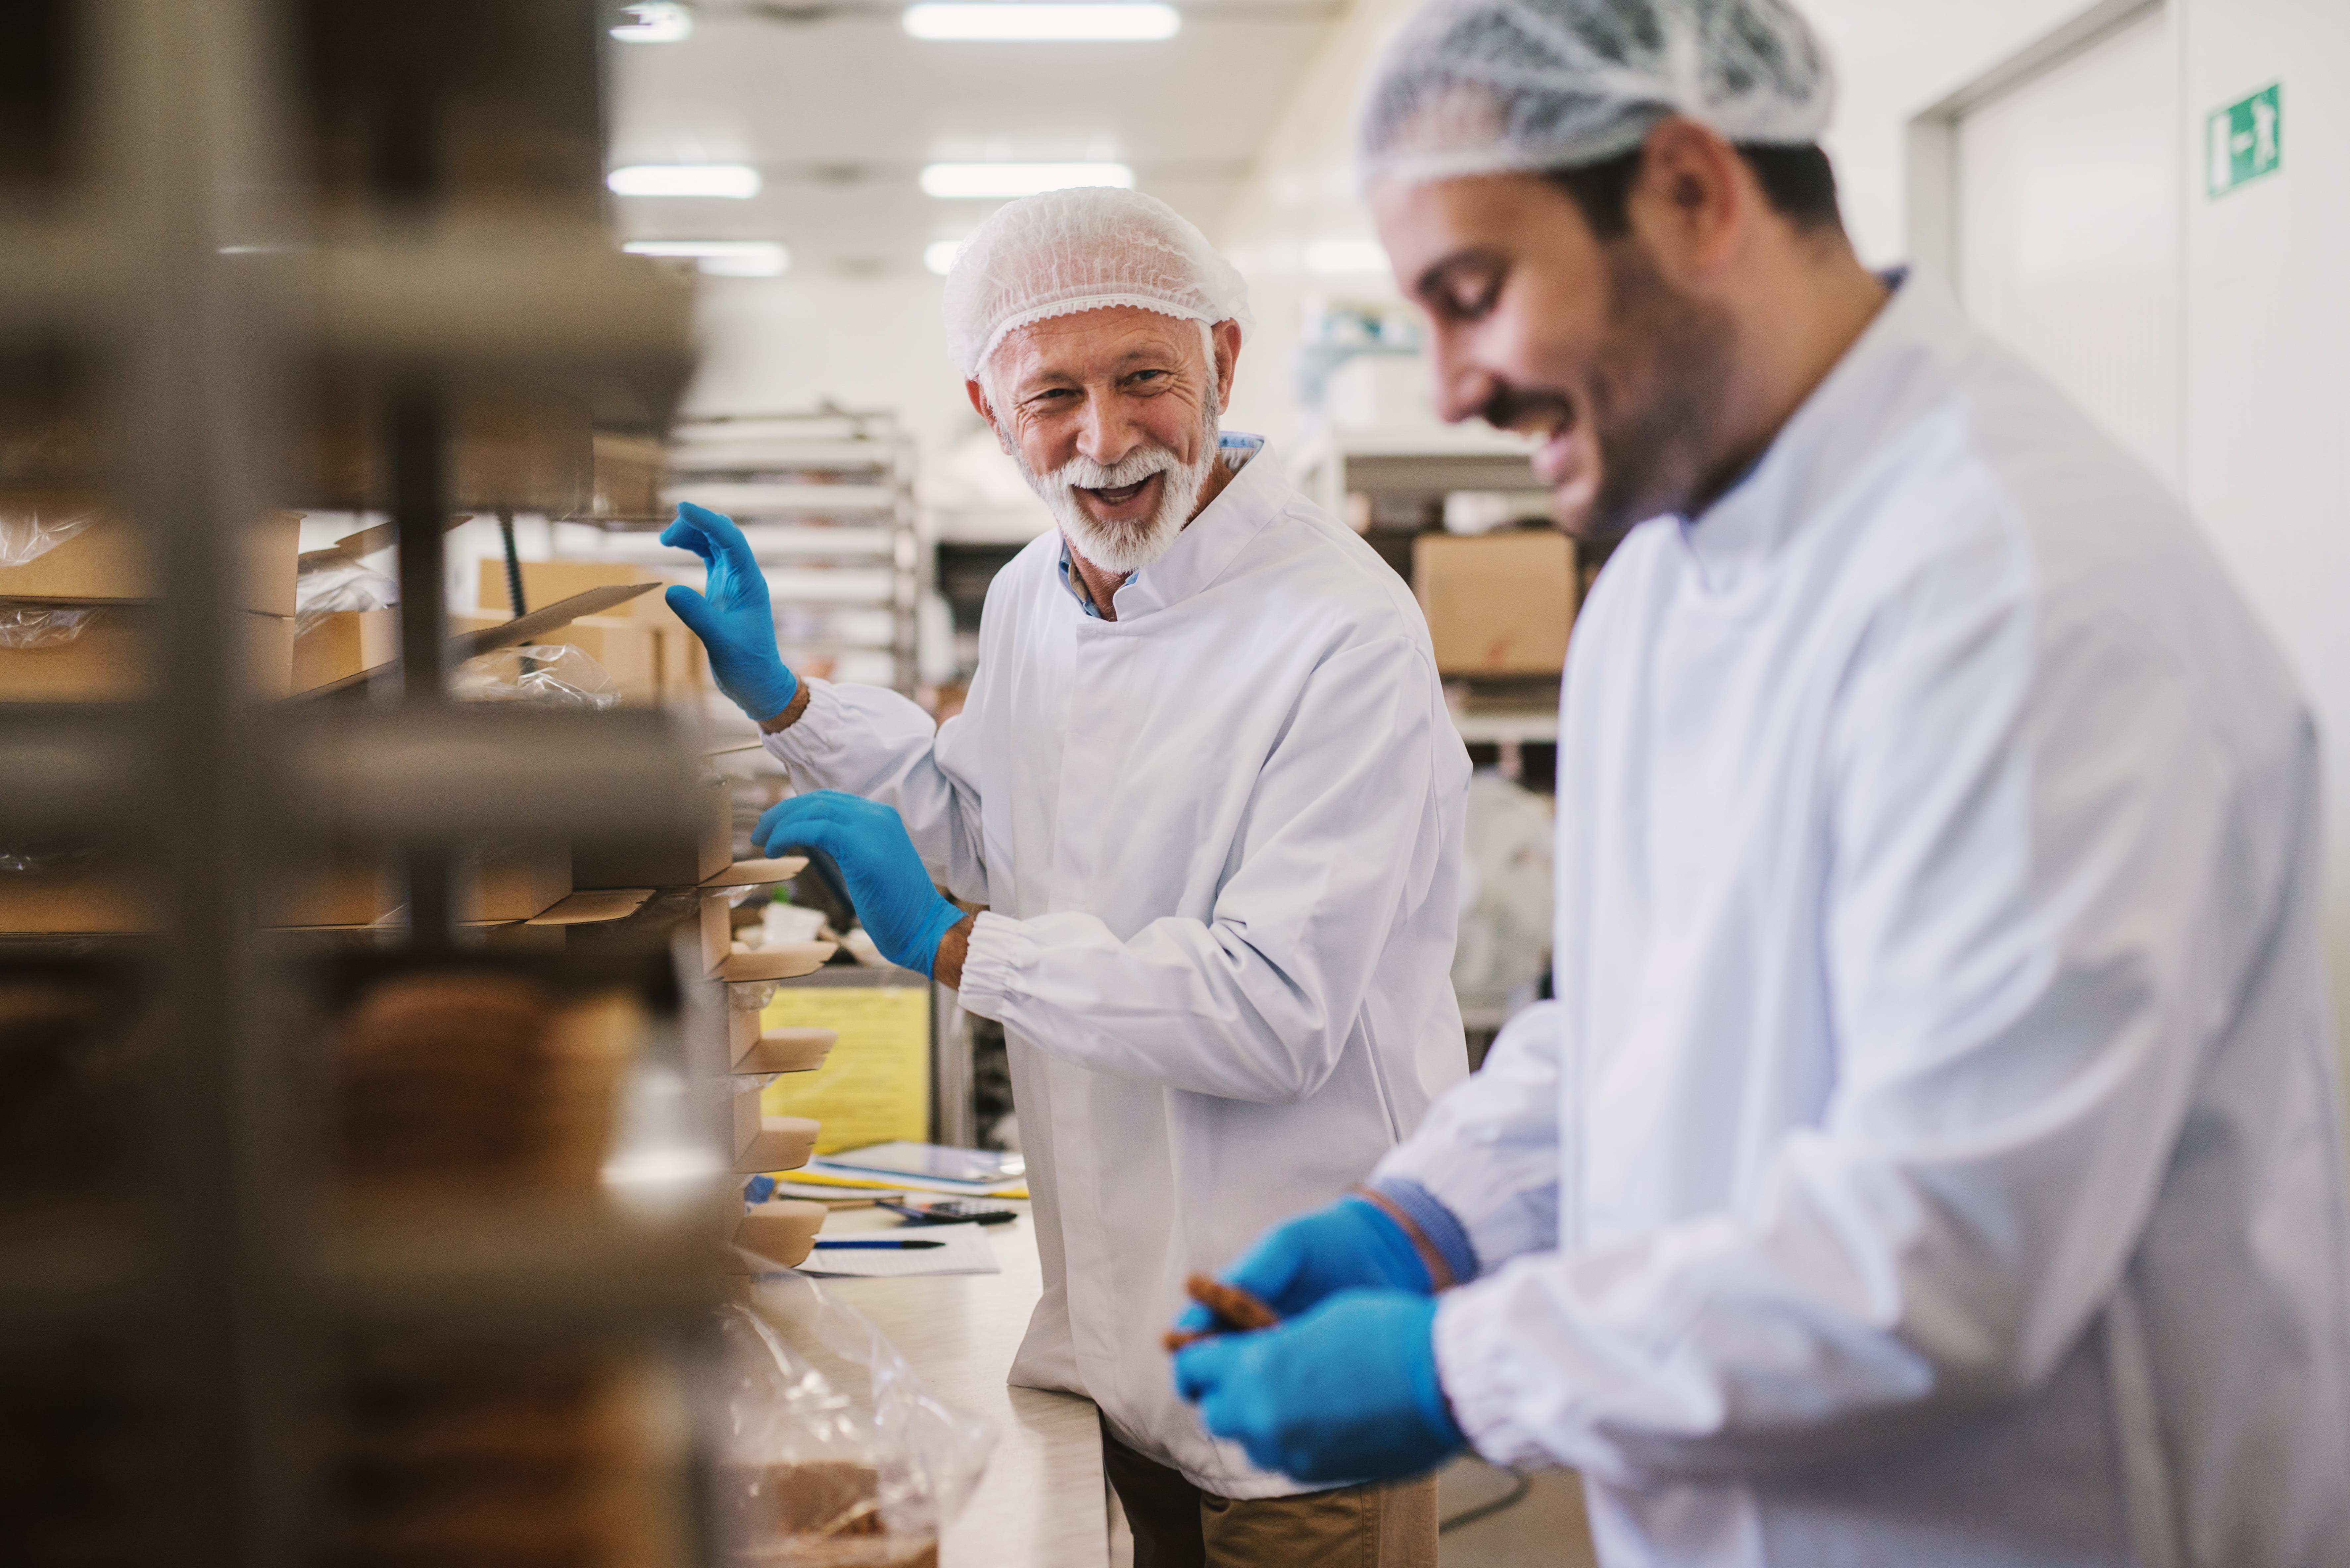 Two workers in white lab coats, hairnets, and gloves, smiling and working together in a bright, clean food production facility, handling packaged products